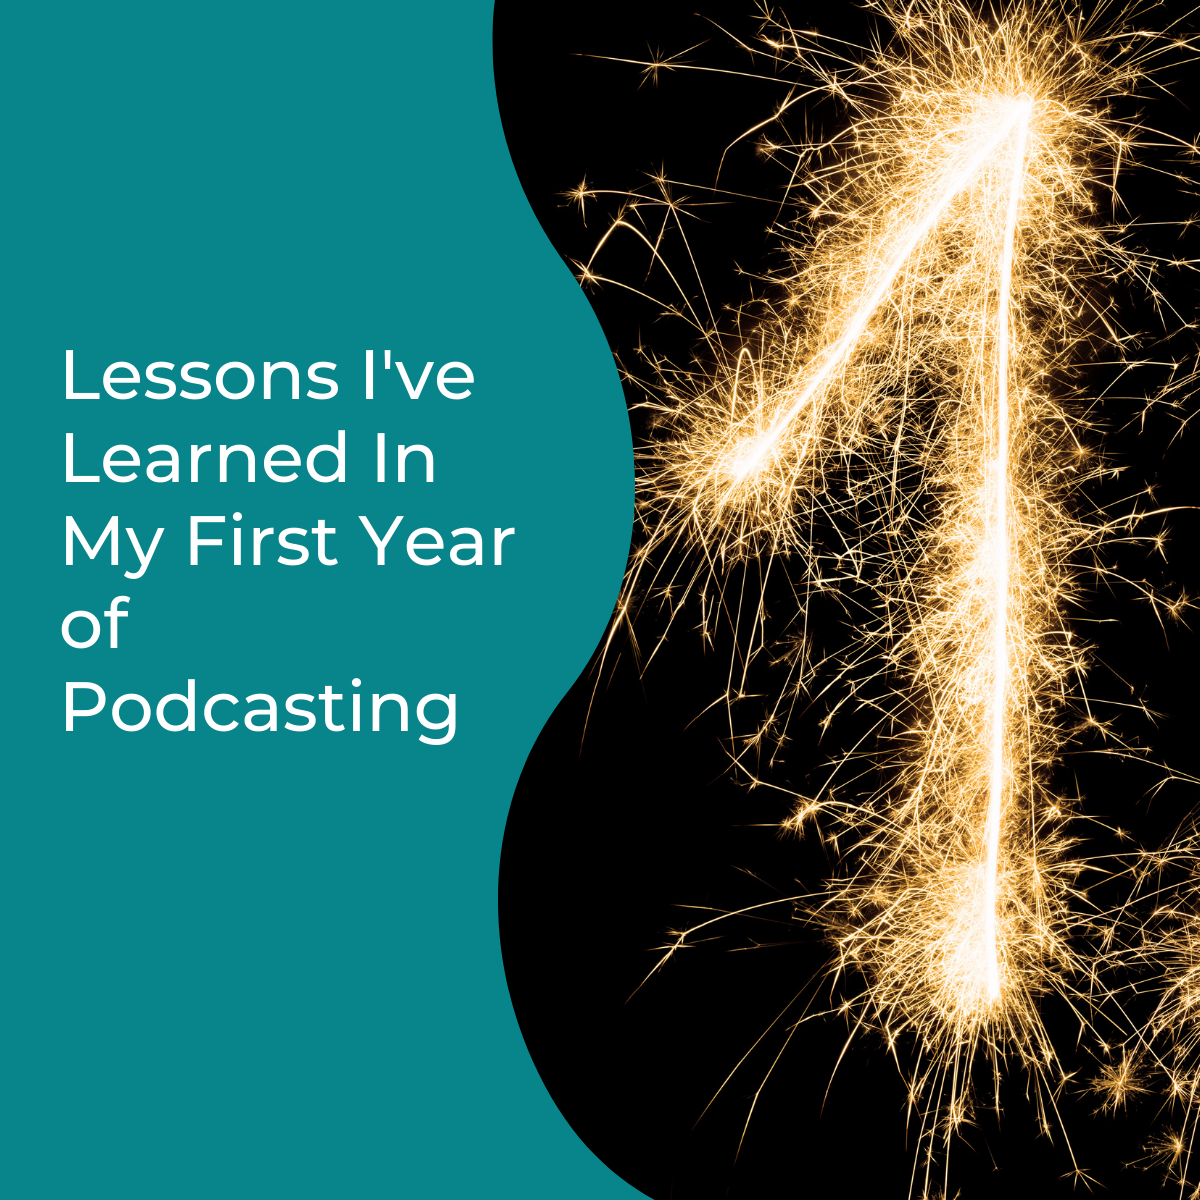 You are currently viewing Lessons I’ve Learned In My First Year of Podcasting